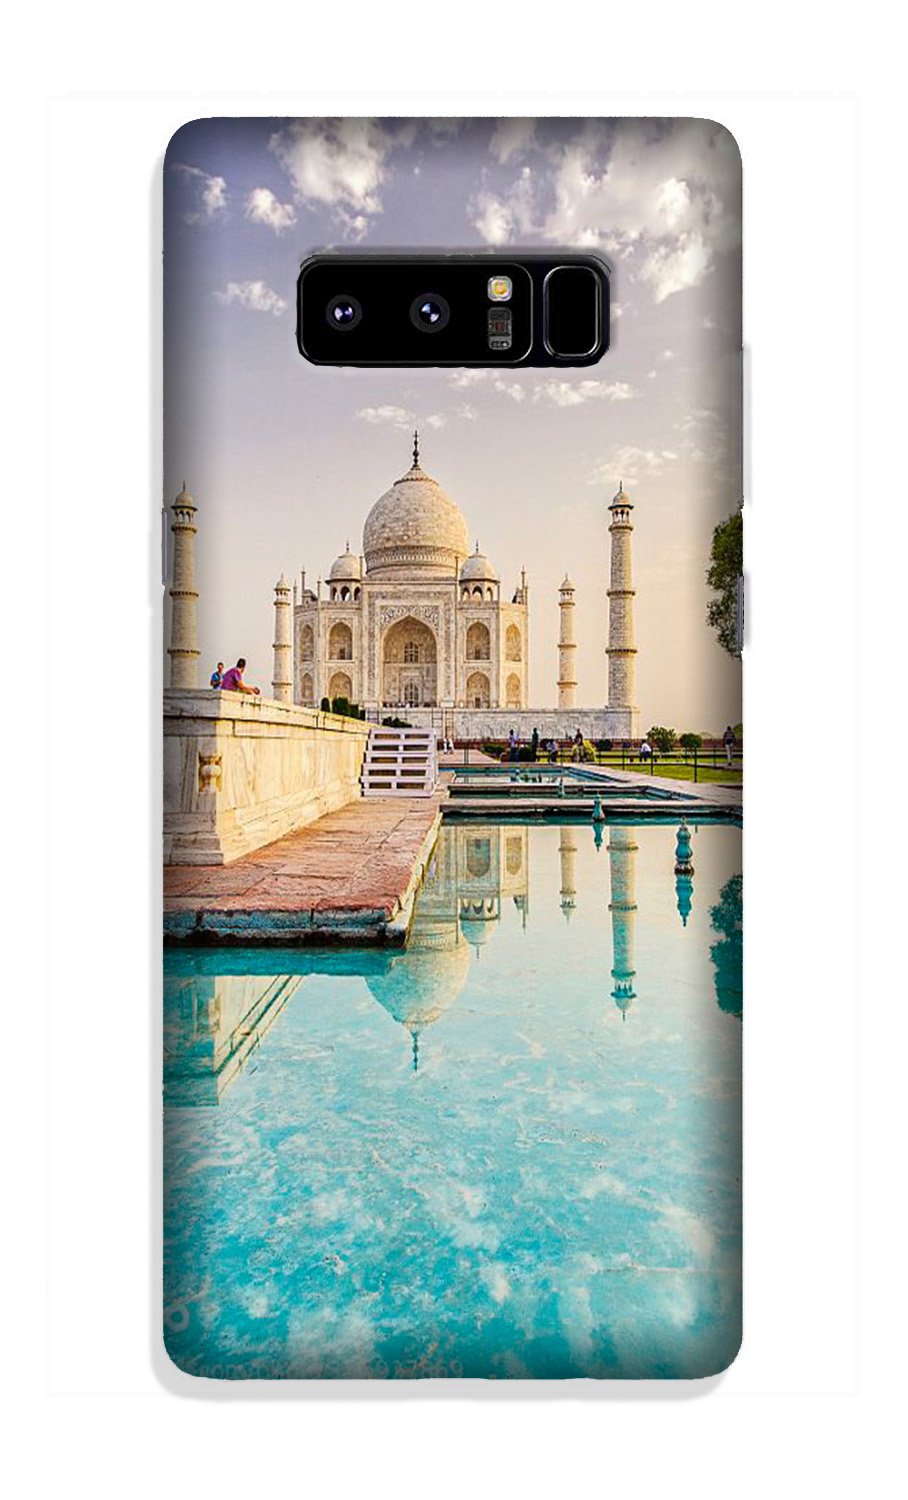 Tajmahal Case for Galaxy Note 8